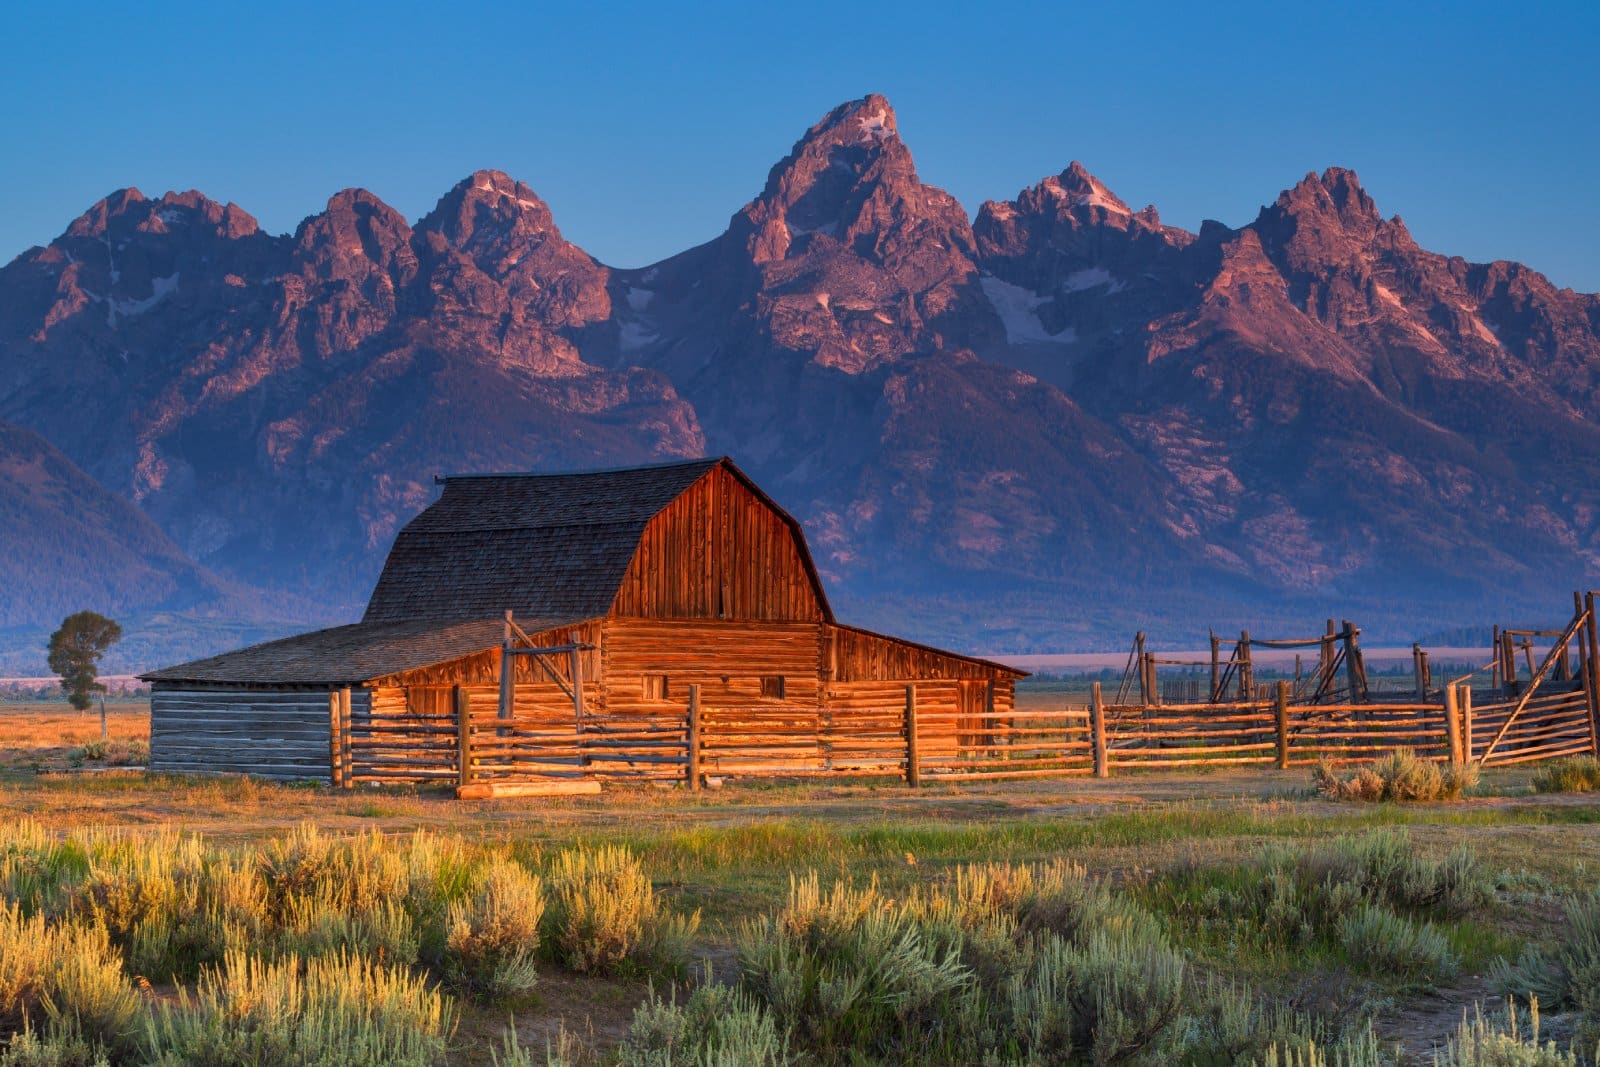 <p class="wp-caption-text">Image Credit: Shutterstock / Bill45</p>  <p><span>Wyoming is where the frontier spirit is alive and kicking, with a side of modern-day challenges and charms. It’s a place that honors its past while writing its own rules for the future. So if you’re looking for an adventure that’s part history lesson, part dive bar crawl, Wyoming’s got you covered.</span></p>